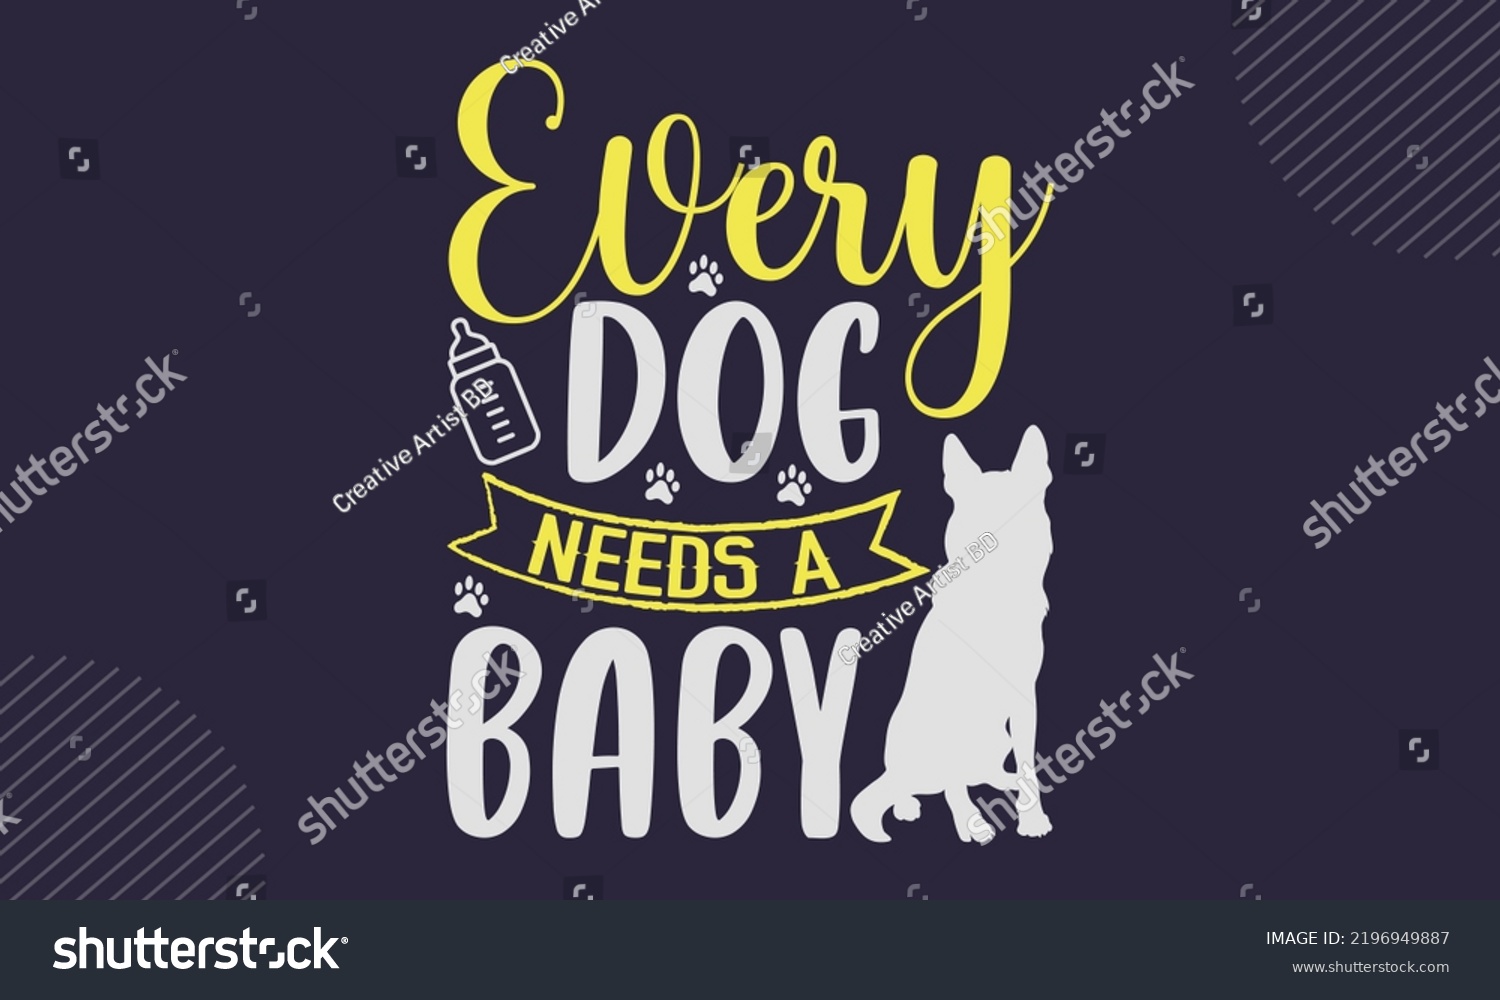 SVG of Every Dog Needs A Baby - Baby T shirt Design, Hand drawn vintage illustration with hand-lettering and decoration elements, Cut Files for Cricut Svg, Digital Download svg